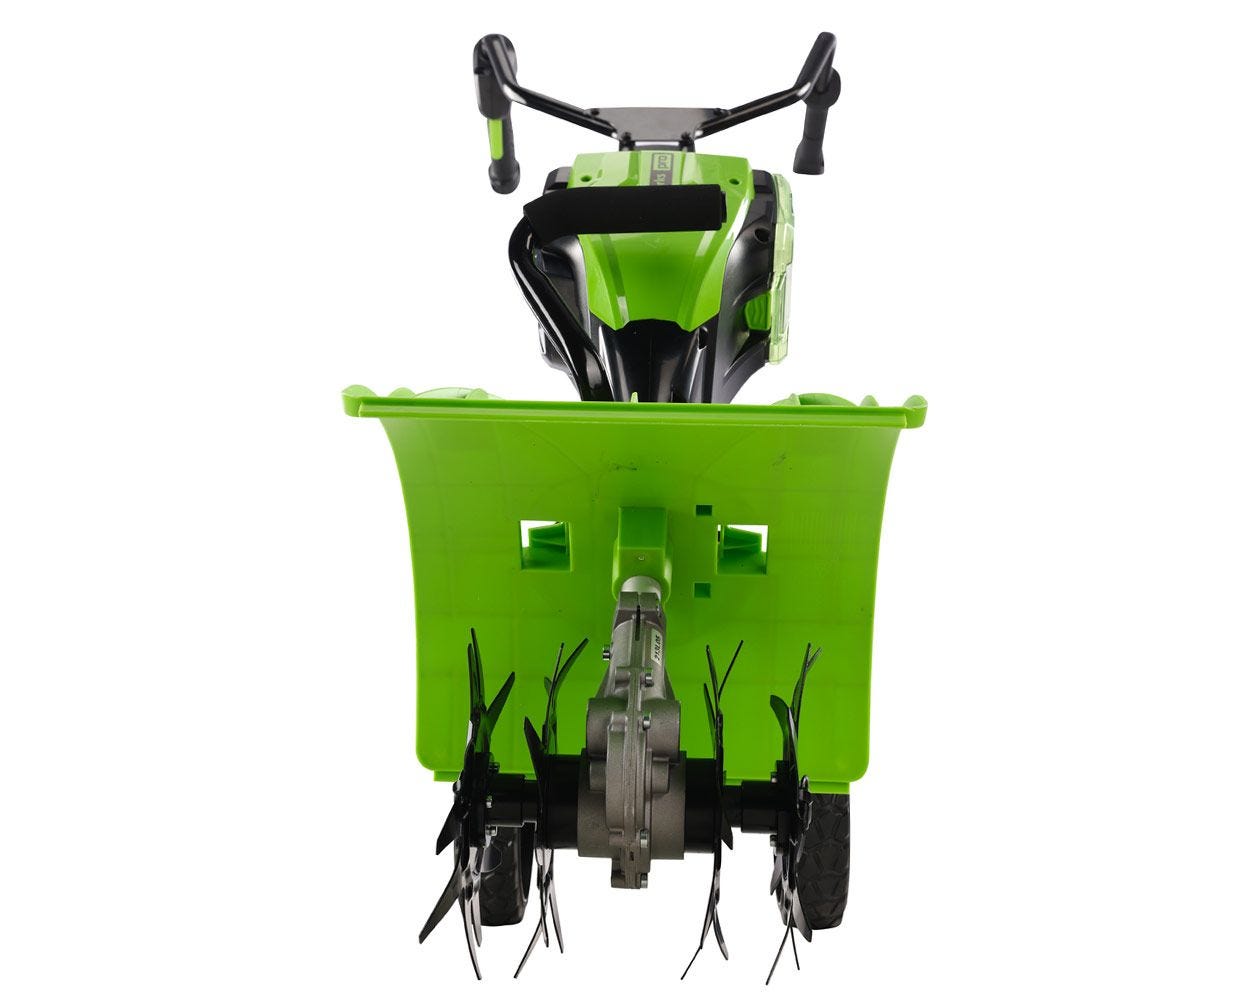 60V 10-Inch Cordless Cultivator Tool Only | Greenworks X-Range